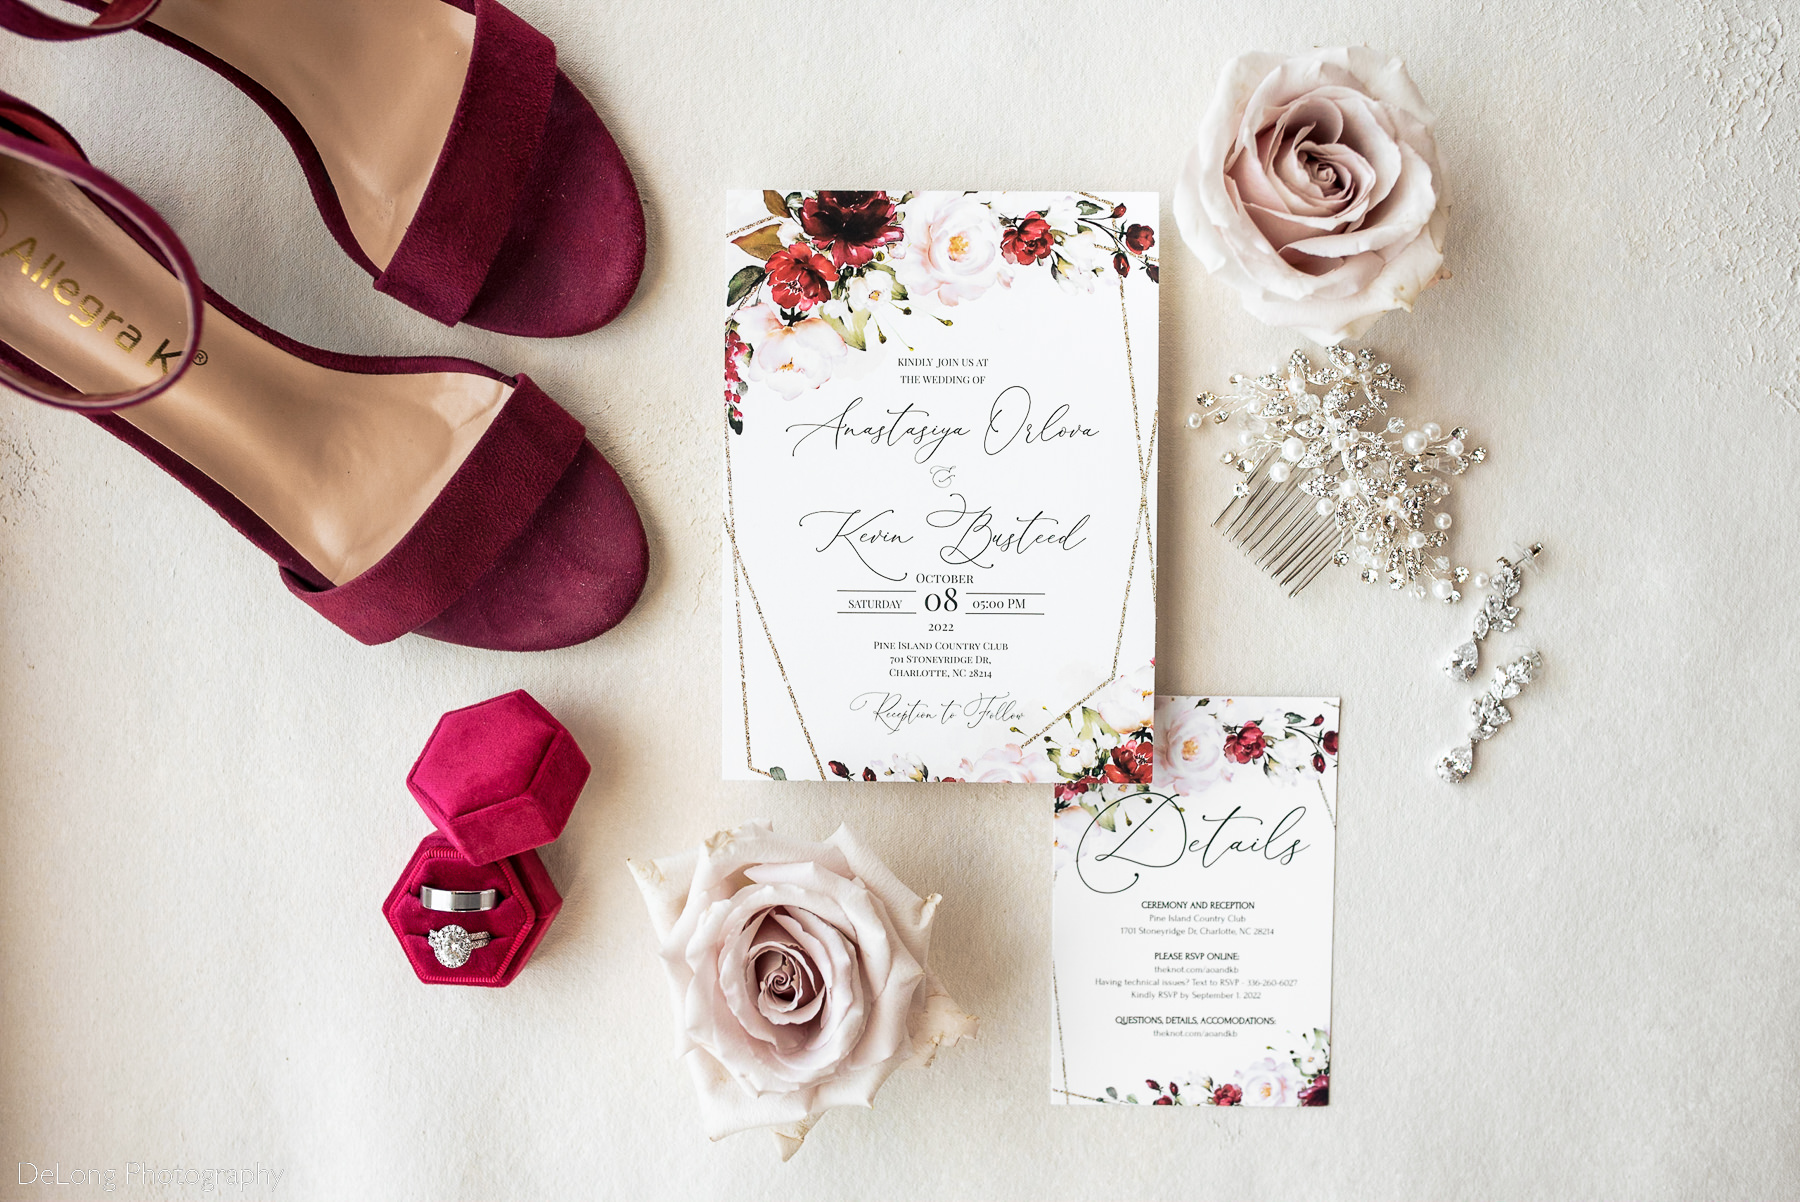 Flat lay of bride's details including shoes, invitation suite, jewelry and accessories in a burgundy and blush color palette at Pine Island Country Club in Charlotte, NC by Charlotte wedding Photographers DeLong Photography